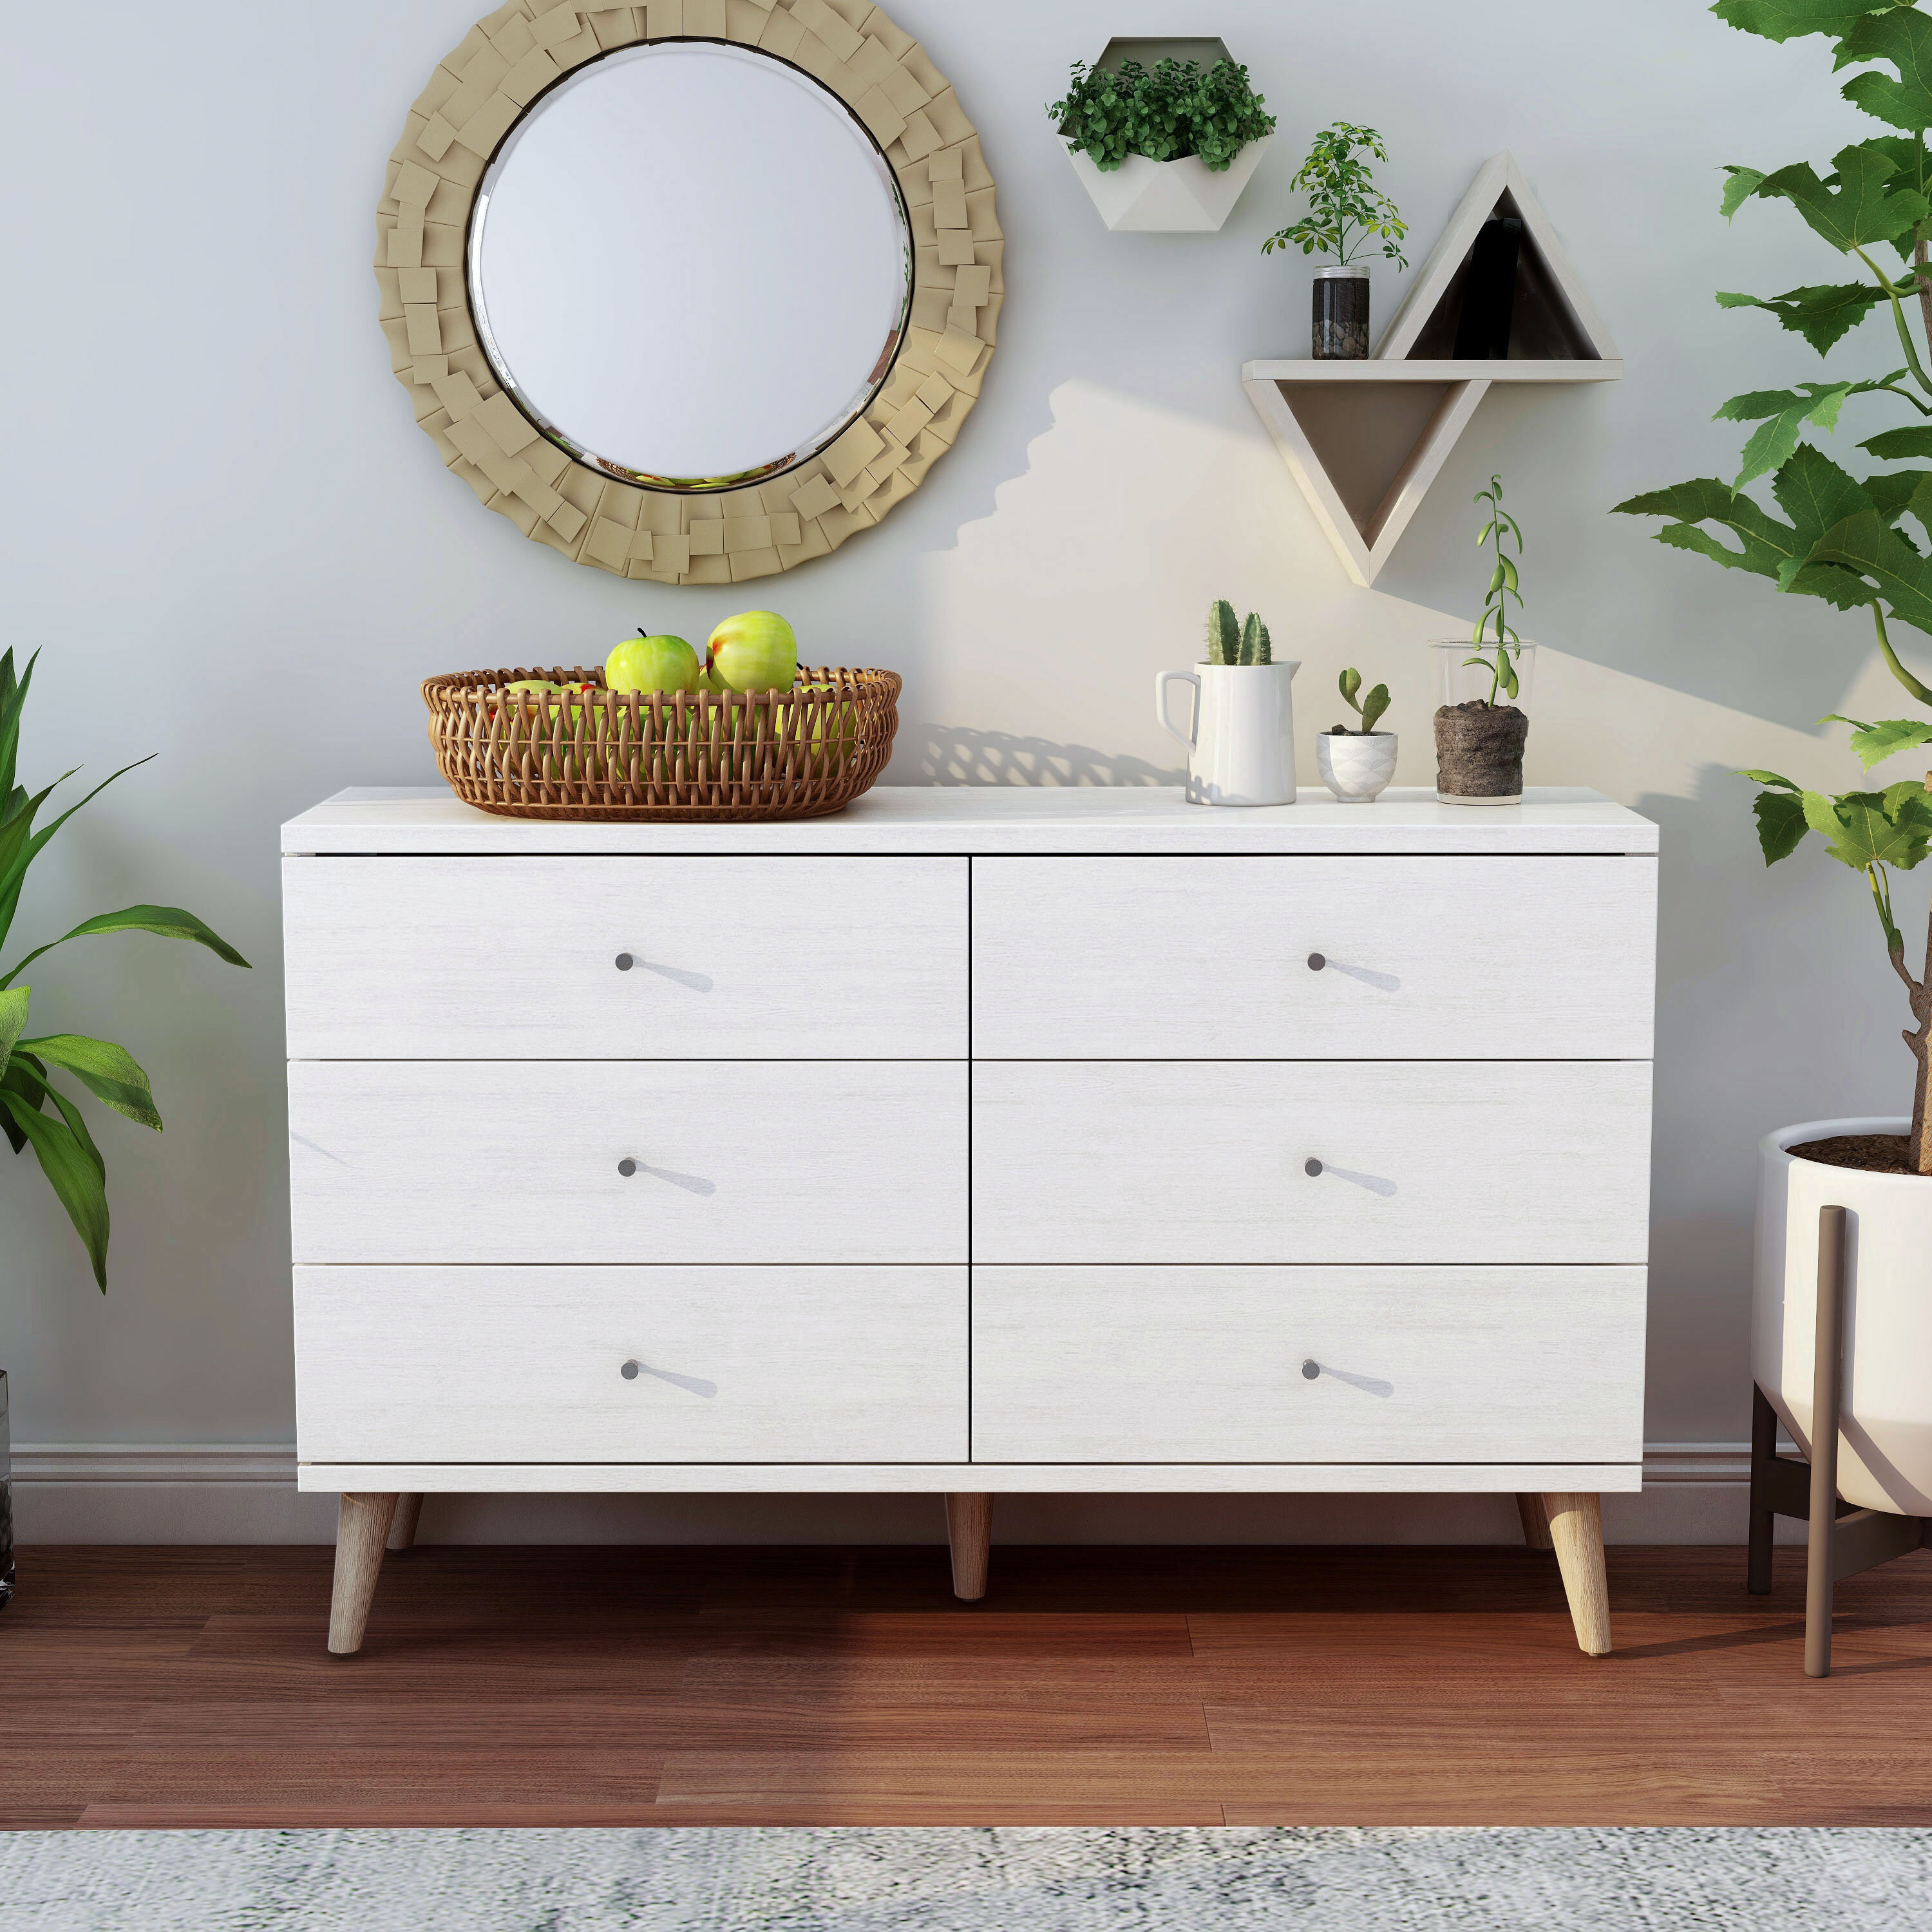 Wayfair White Wood Dressers Chests You Ll Love In 2021